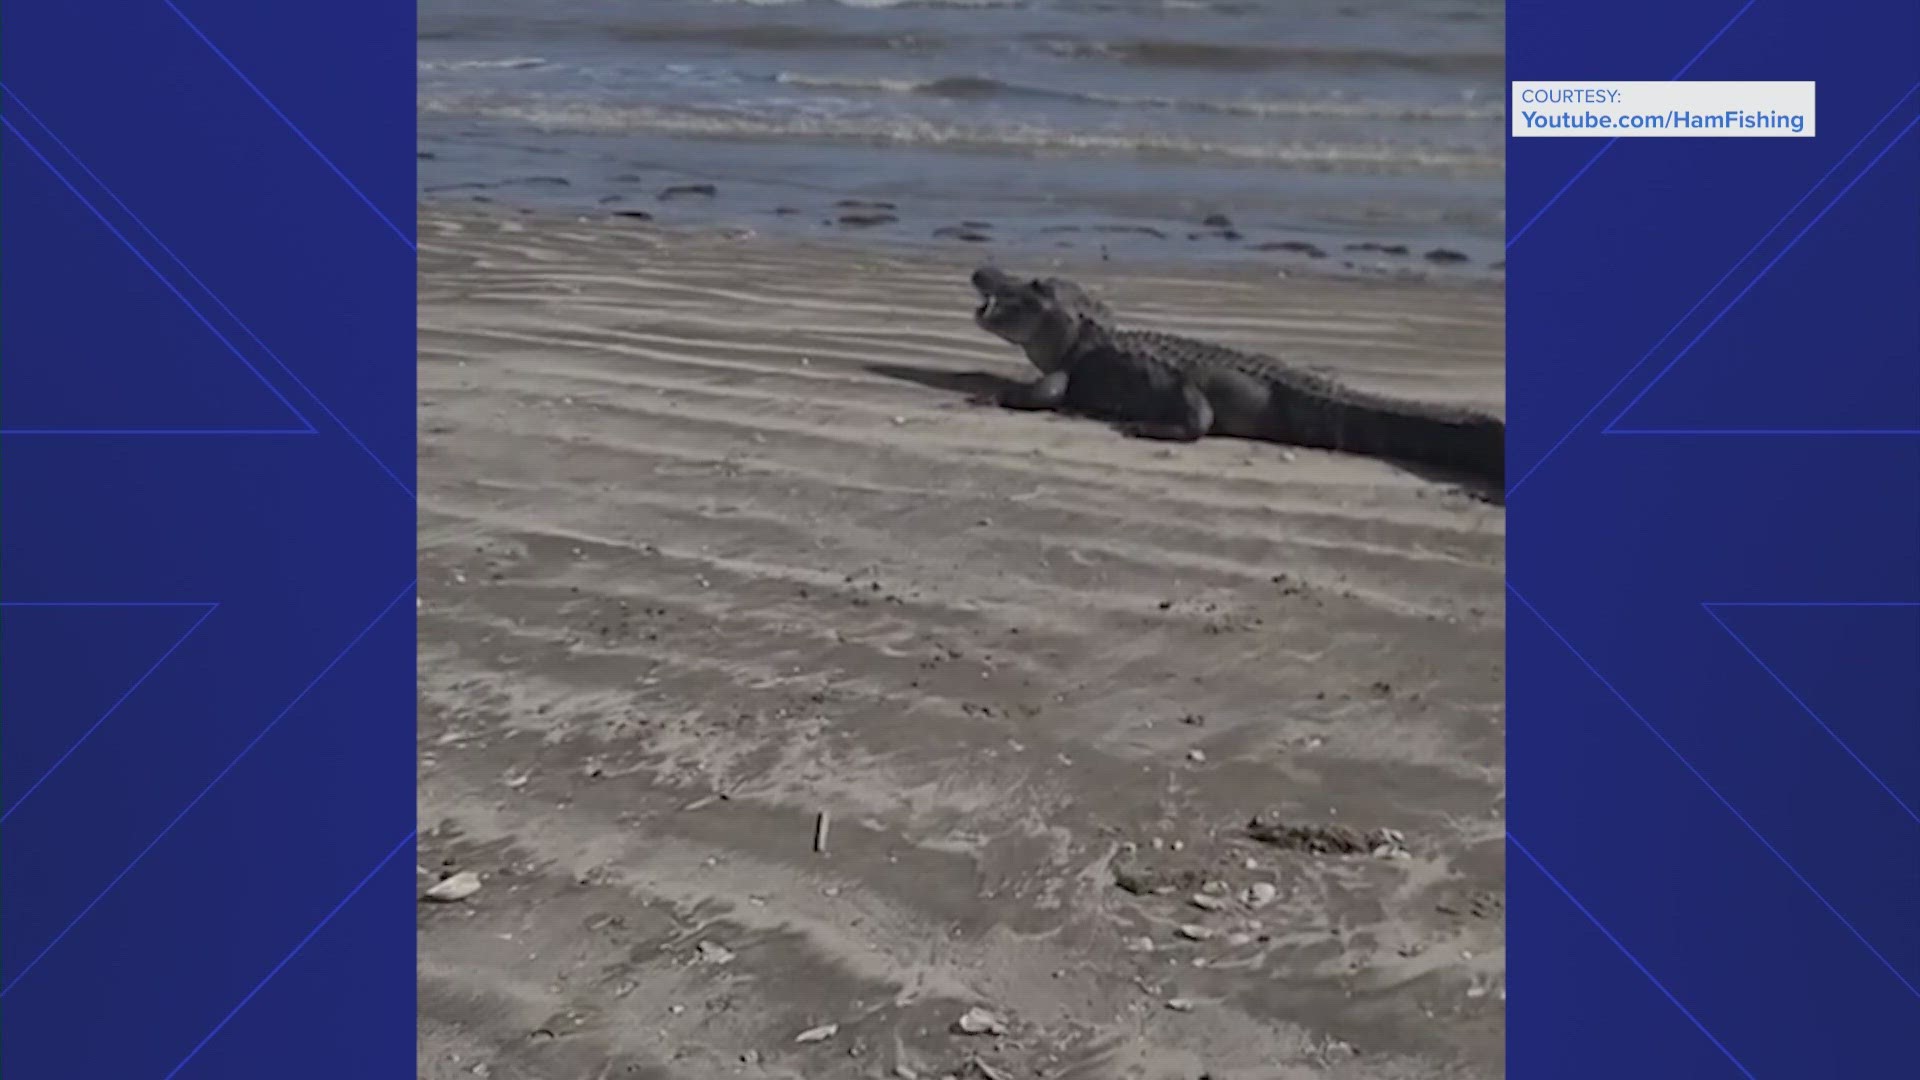 It's not a common sight, but wildlife experts said alligators do sometimes leave freshwater and briefly visit salt water to get rid of parasites.